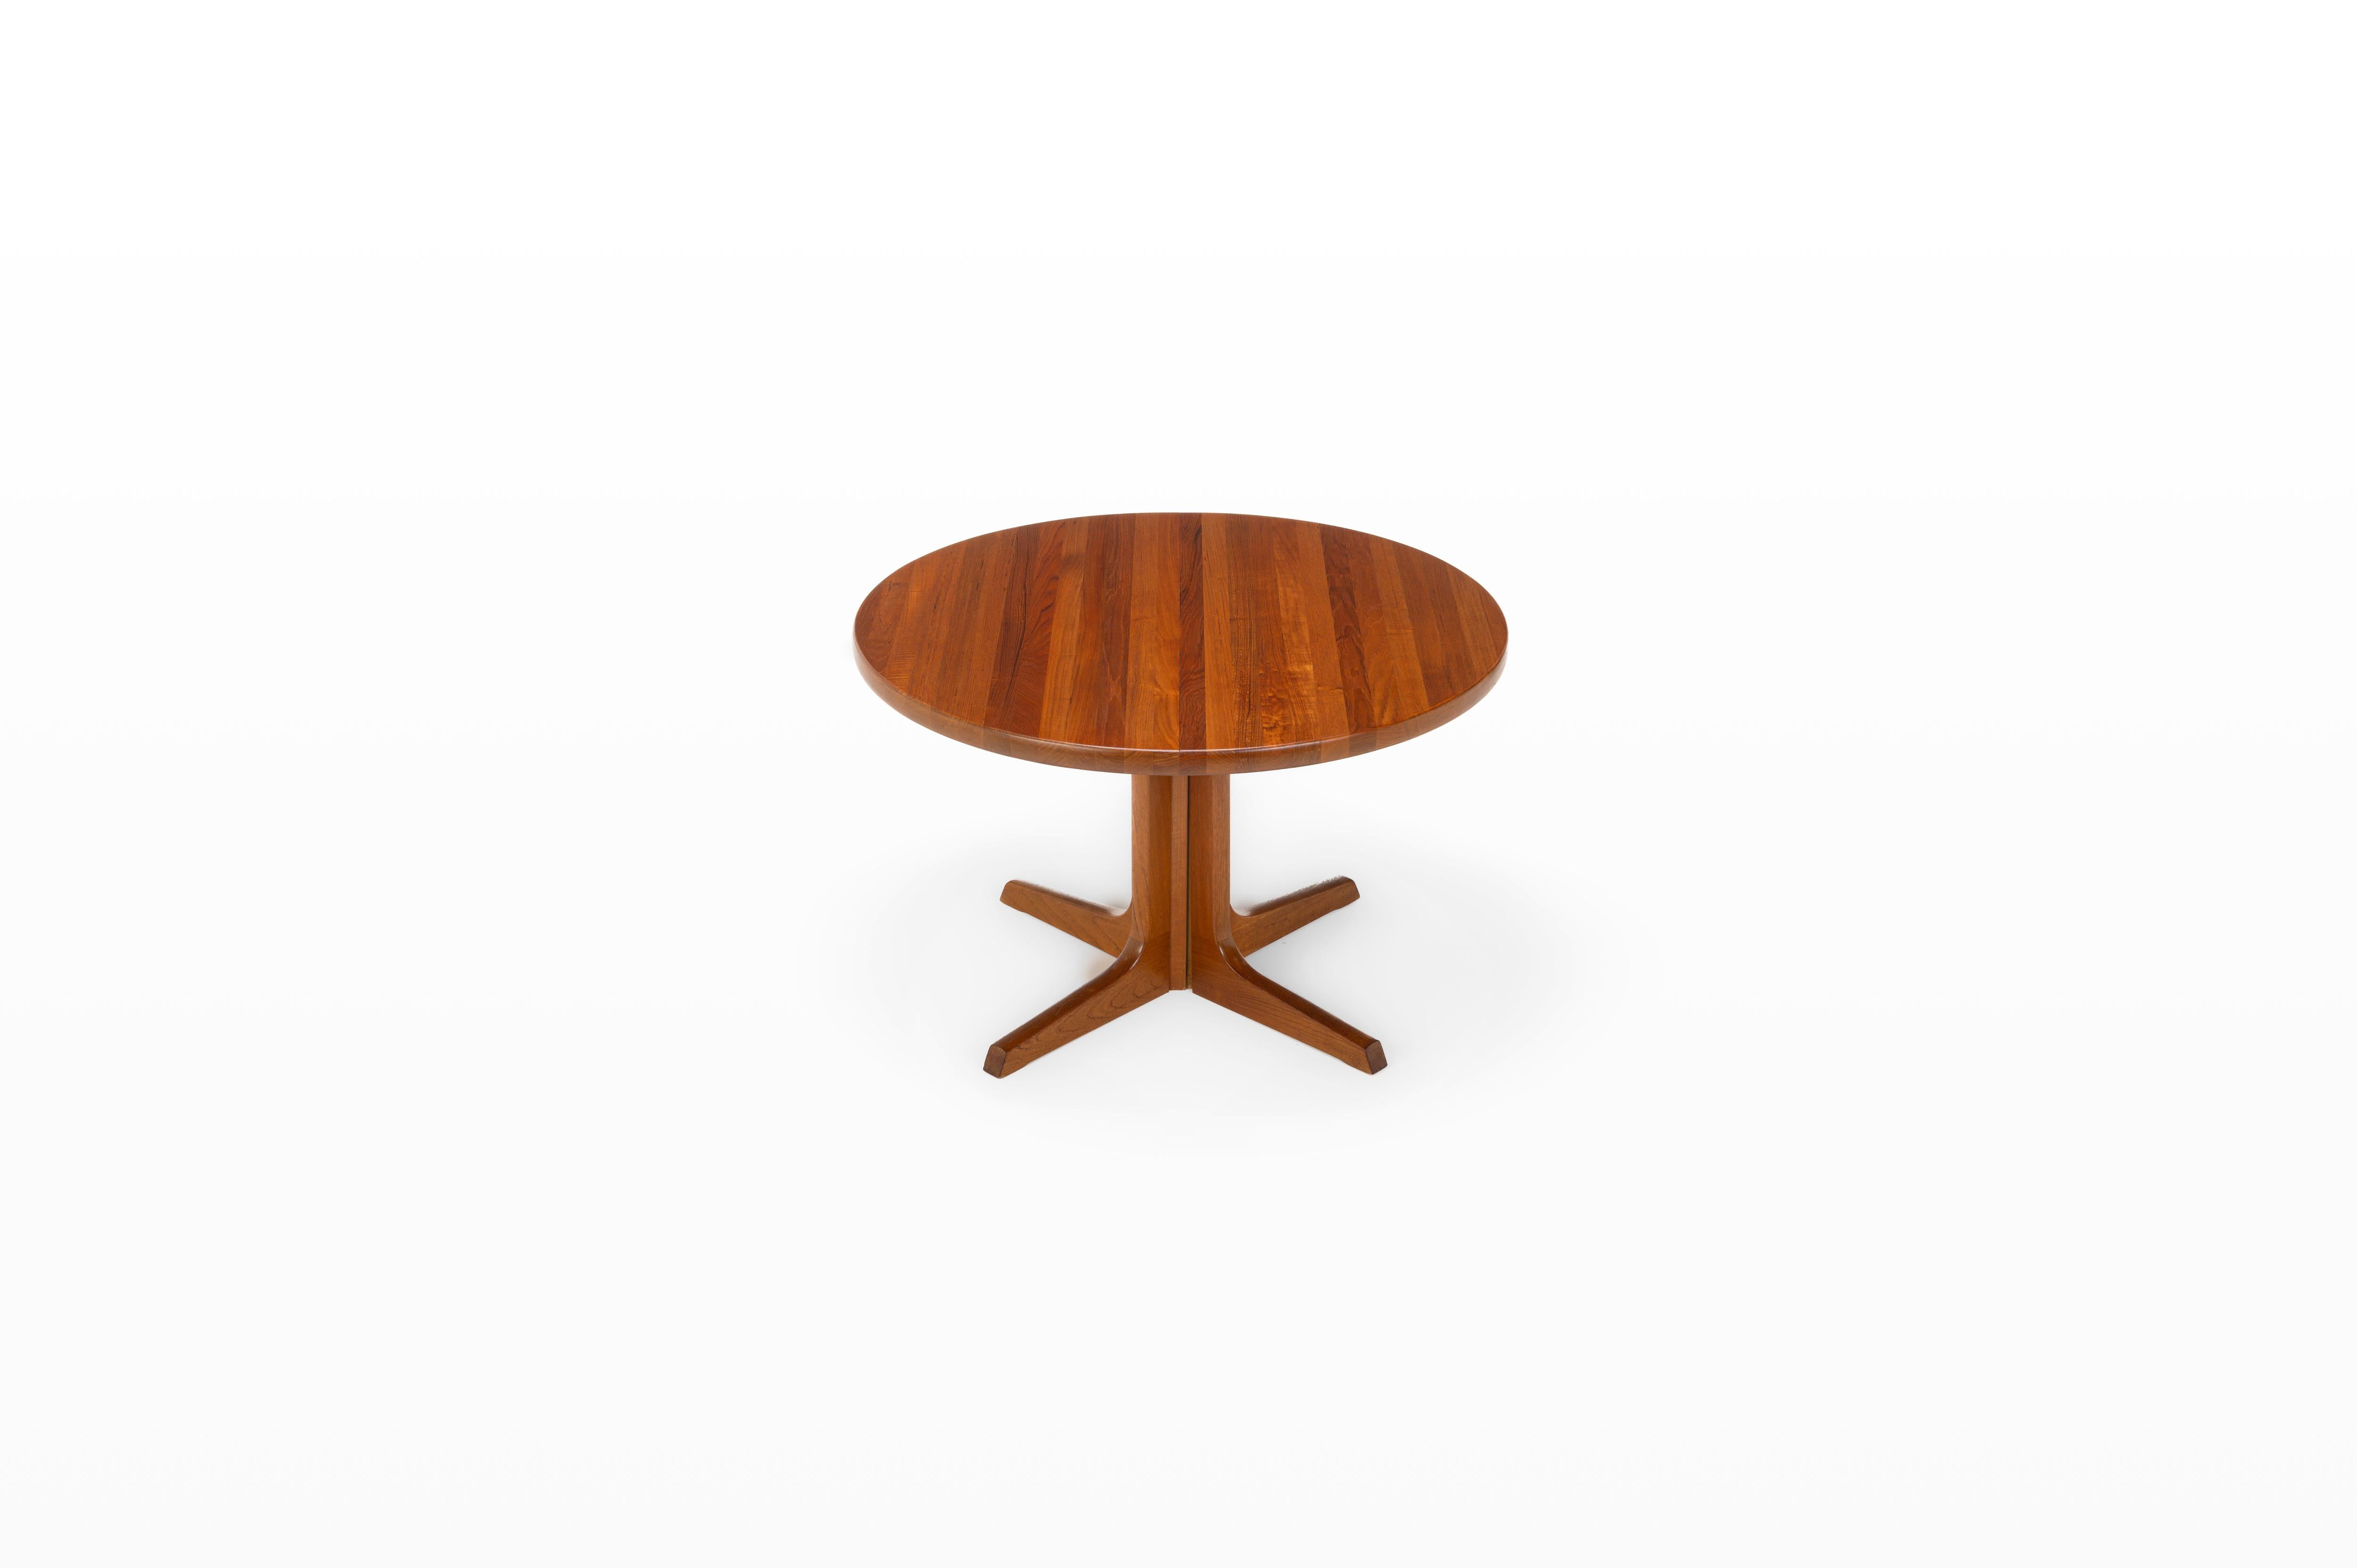 Beautiful Scandinavian round dining table manufactured by Gudme Mobelfabrik. This table is extendable and produced in Denmark in the 1960s. The table is made of solid teak wood and is in very good restored condition.

Dimensions:
W: 114 – 163,5 –